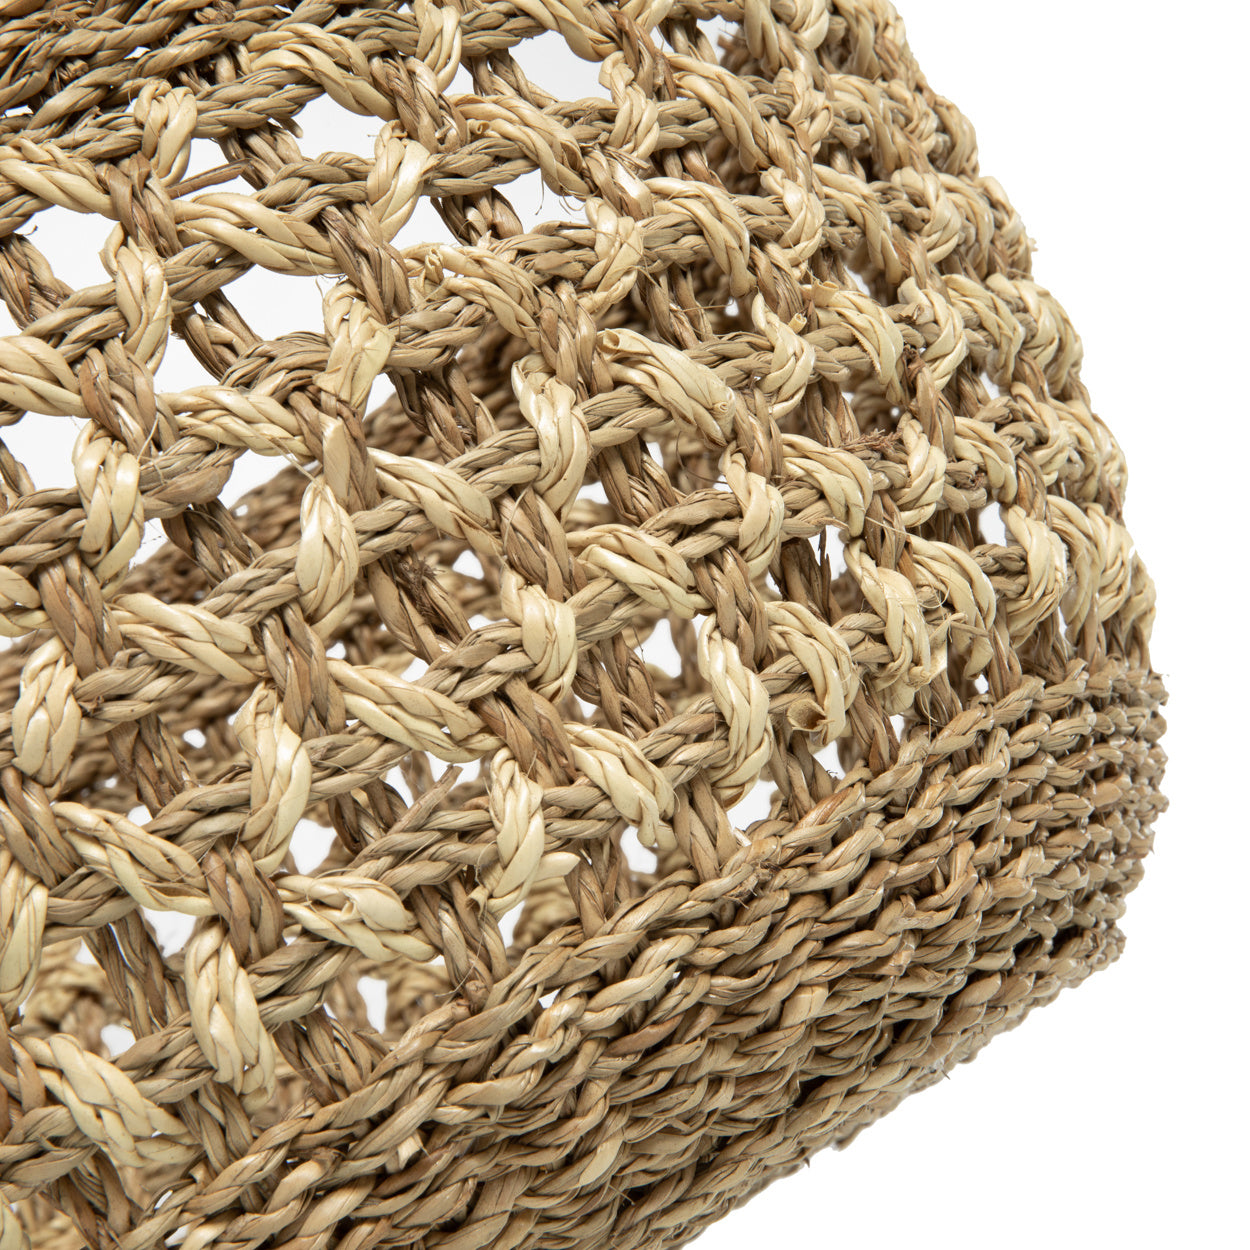 THE PHU QUOC Baskets Set of 3 detail